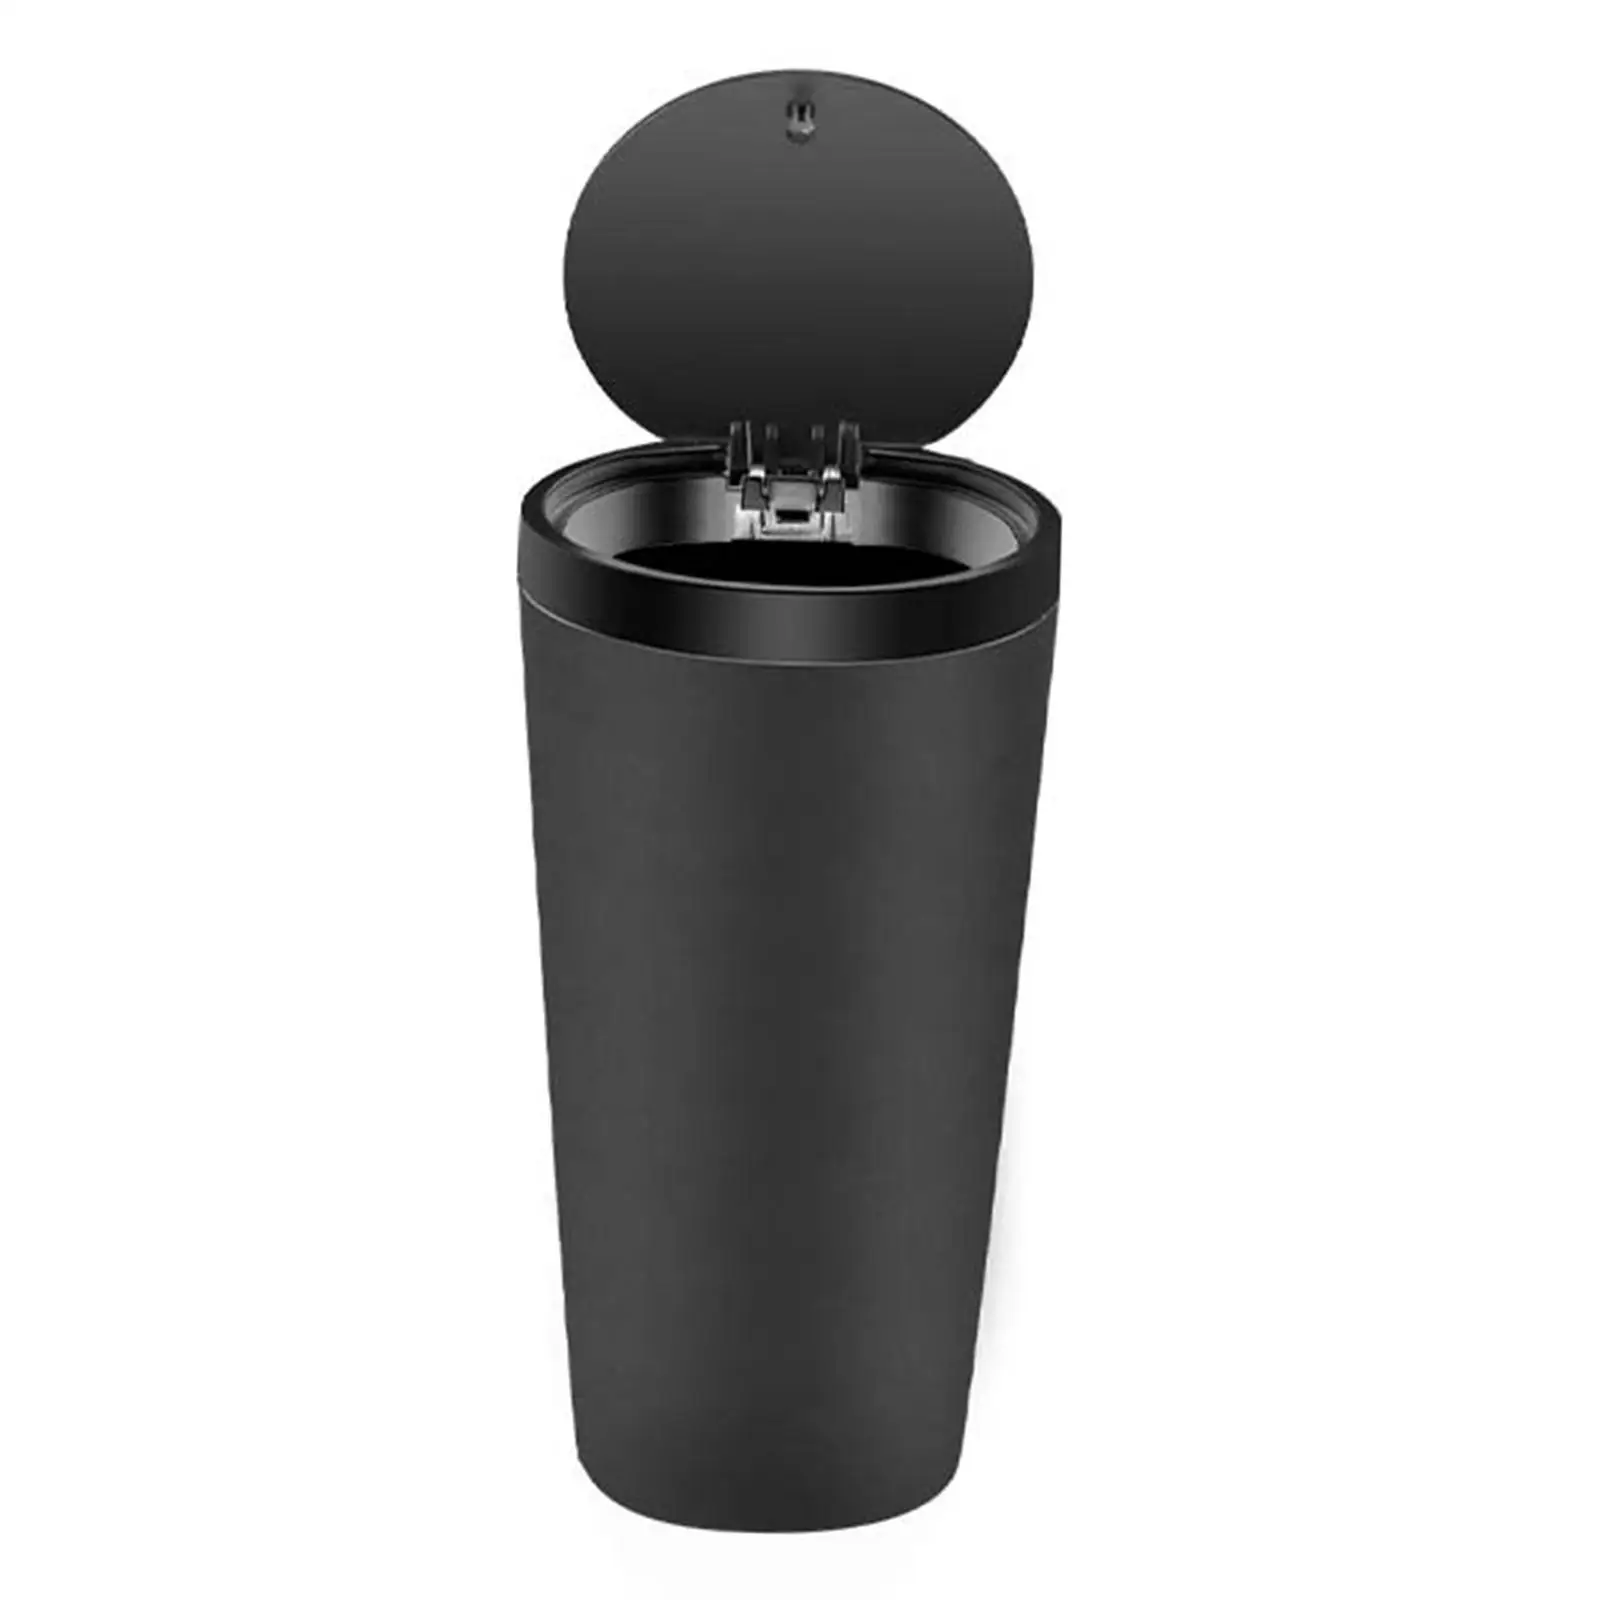 Car Trash Can Car Interior Accessory Universal with Top Cover Organizer